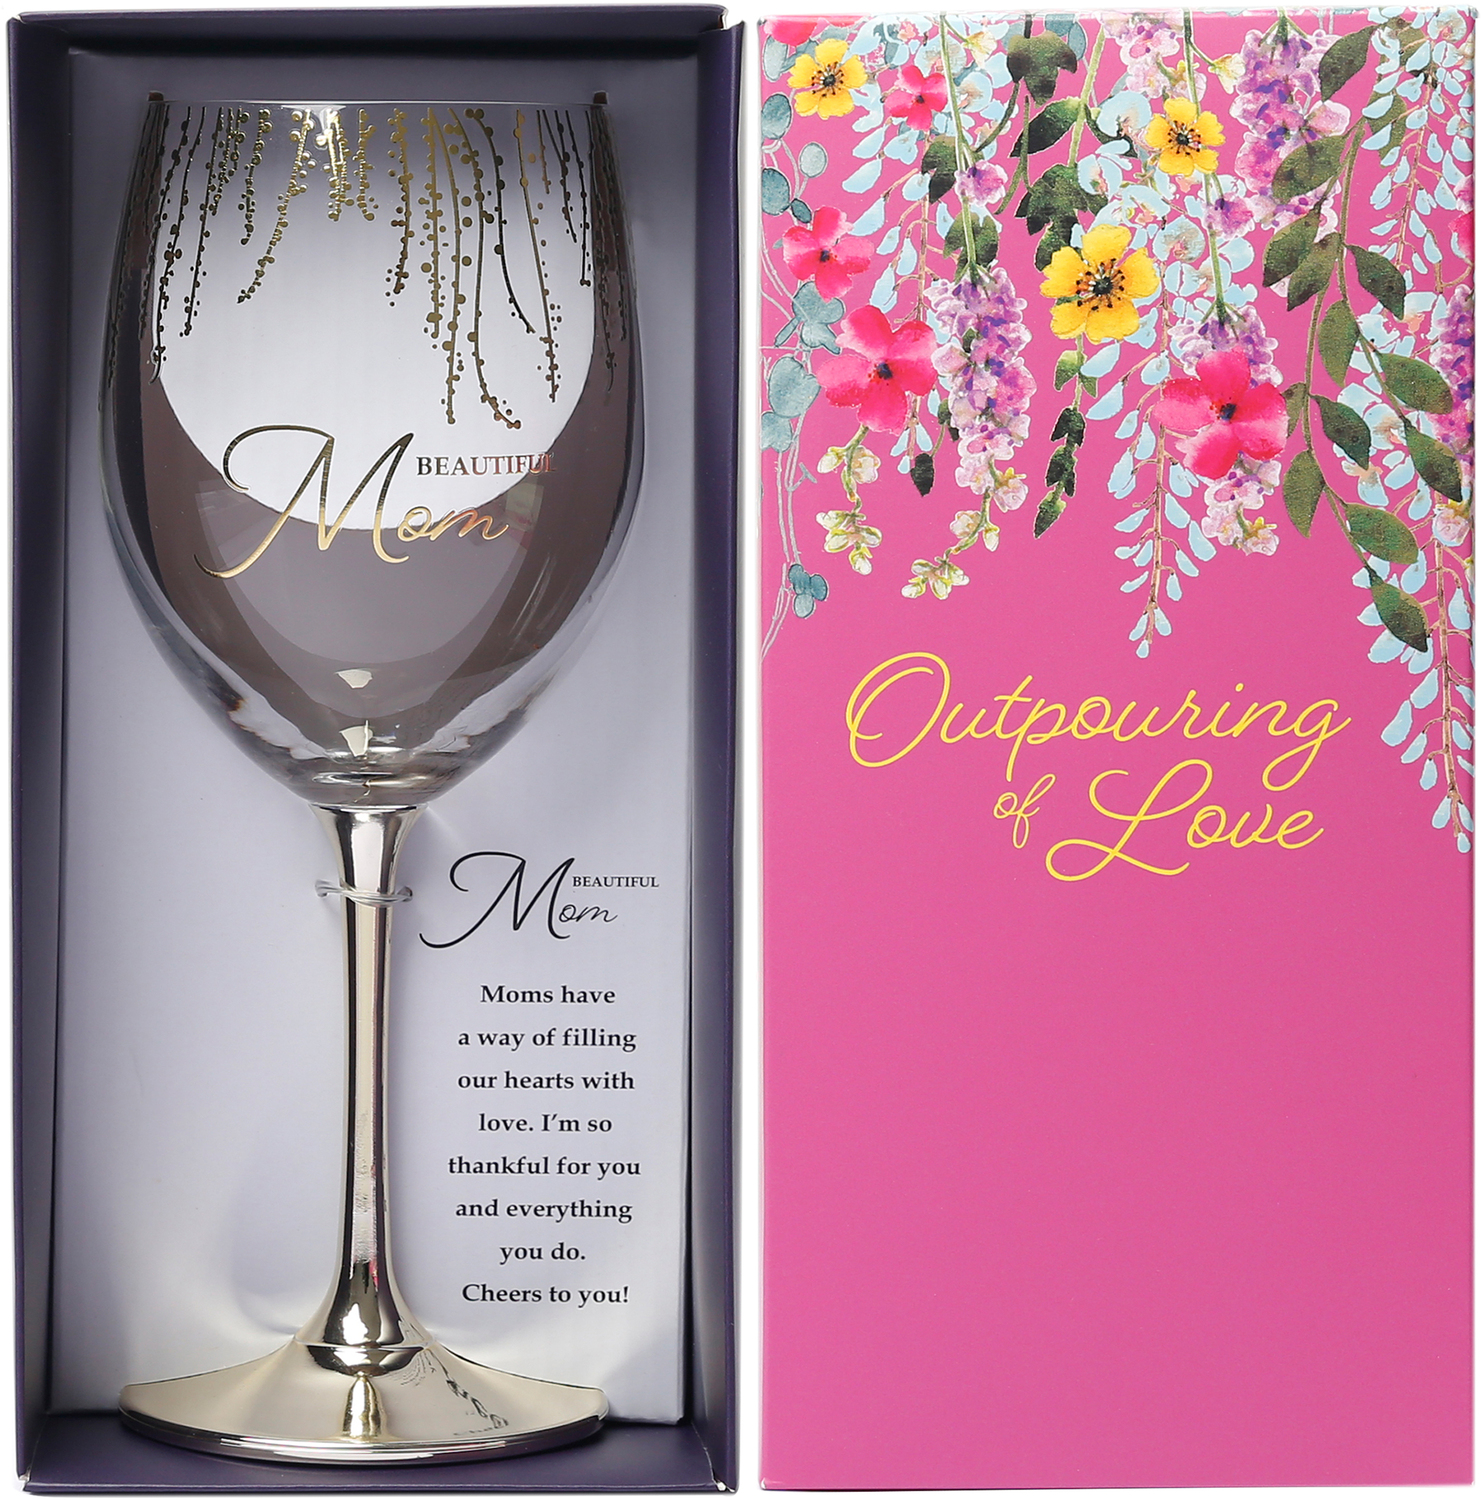 Mom  by Outpouring of Love - Mom  - Gift Boxed 19 oz Crystal Wine Glass